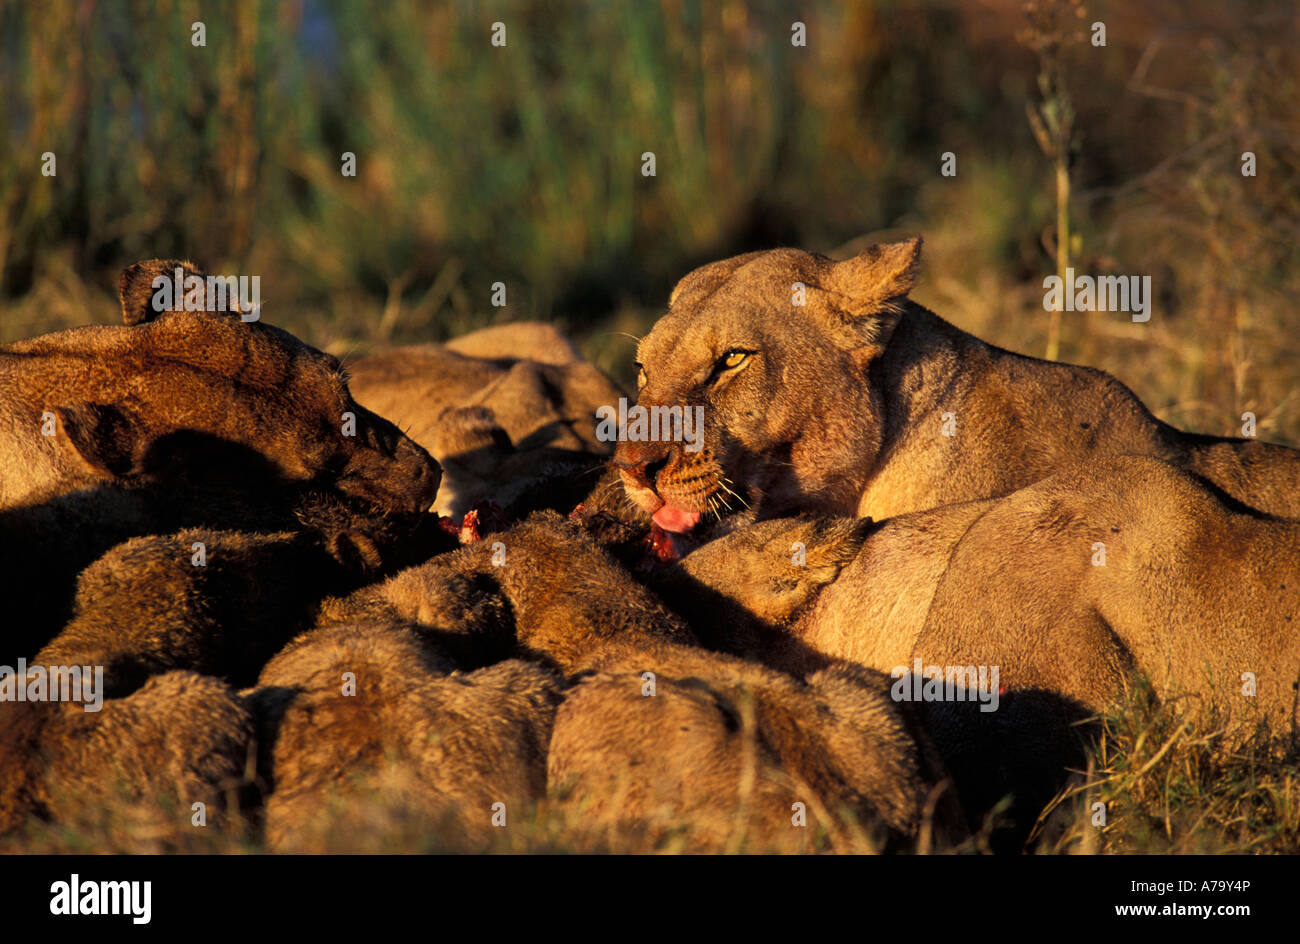 A lioness looks up with ears flattened while a pride of lions tussle over a kill Okavango Delta Botswana Stock Photo